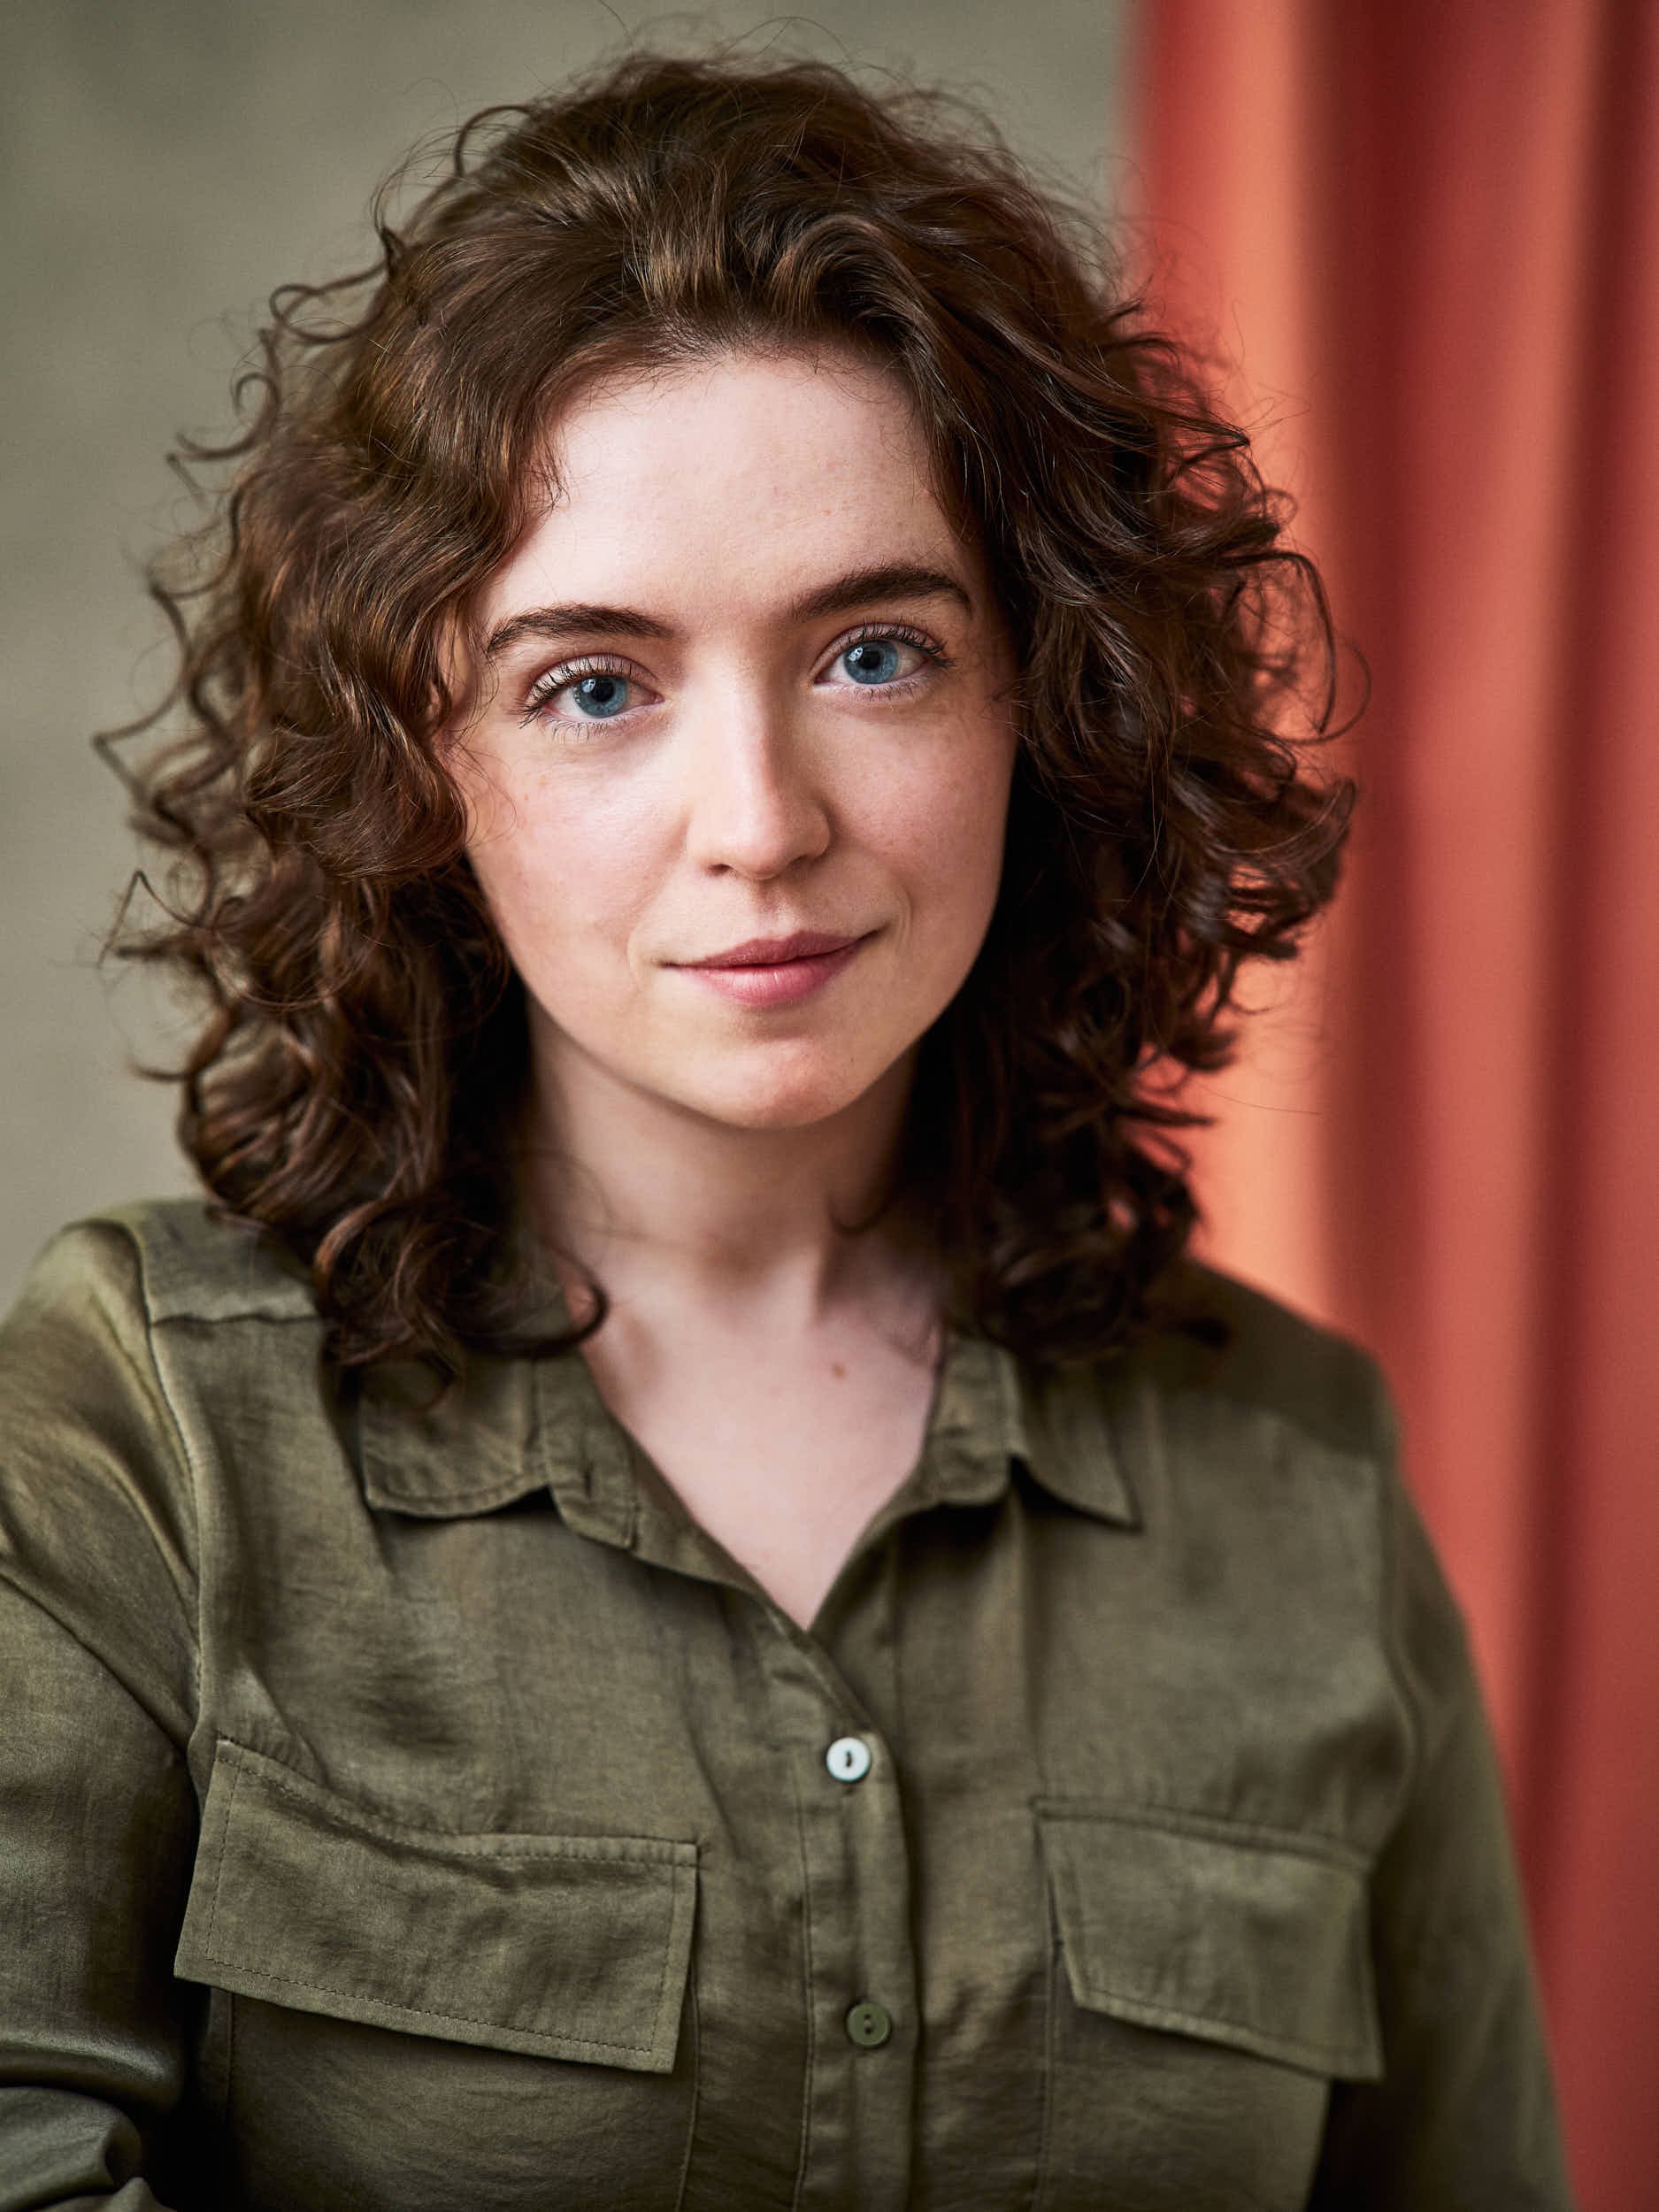 a headshot of a young actress from Galway.jpg